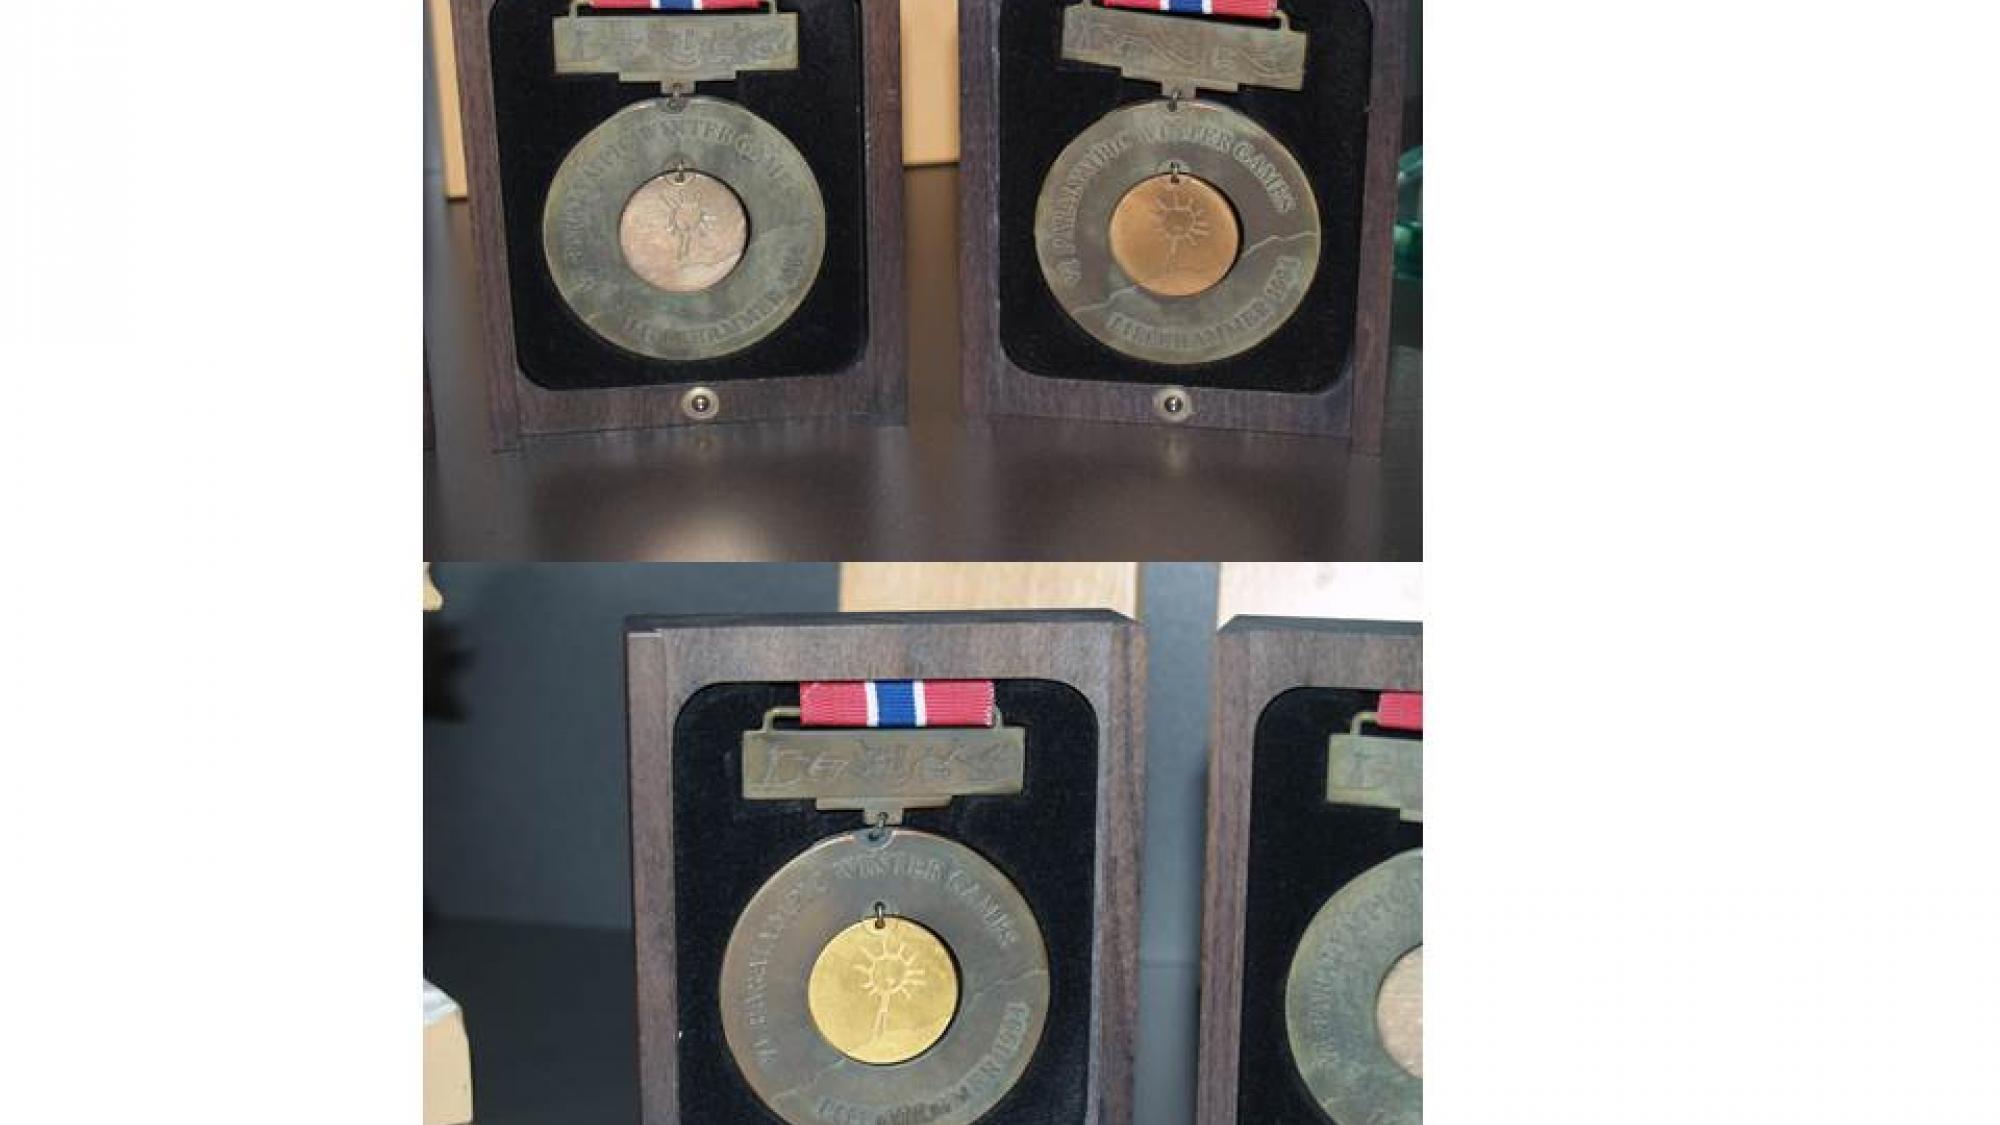 Lillehammer 1994 Paralympic Winter medals